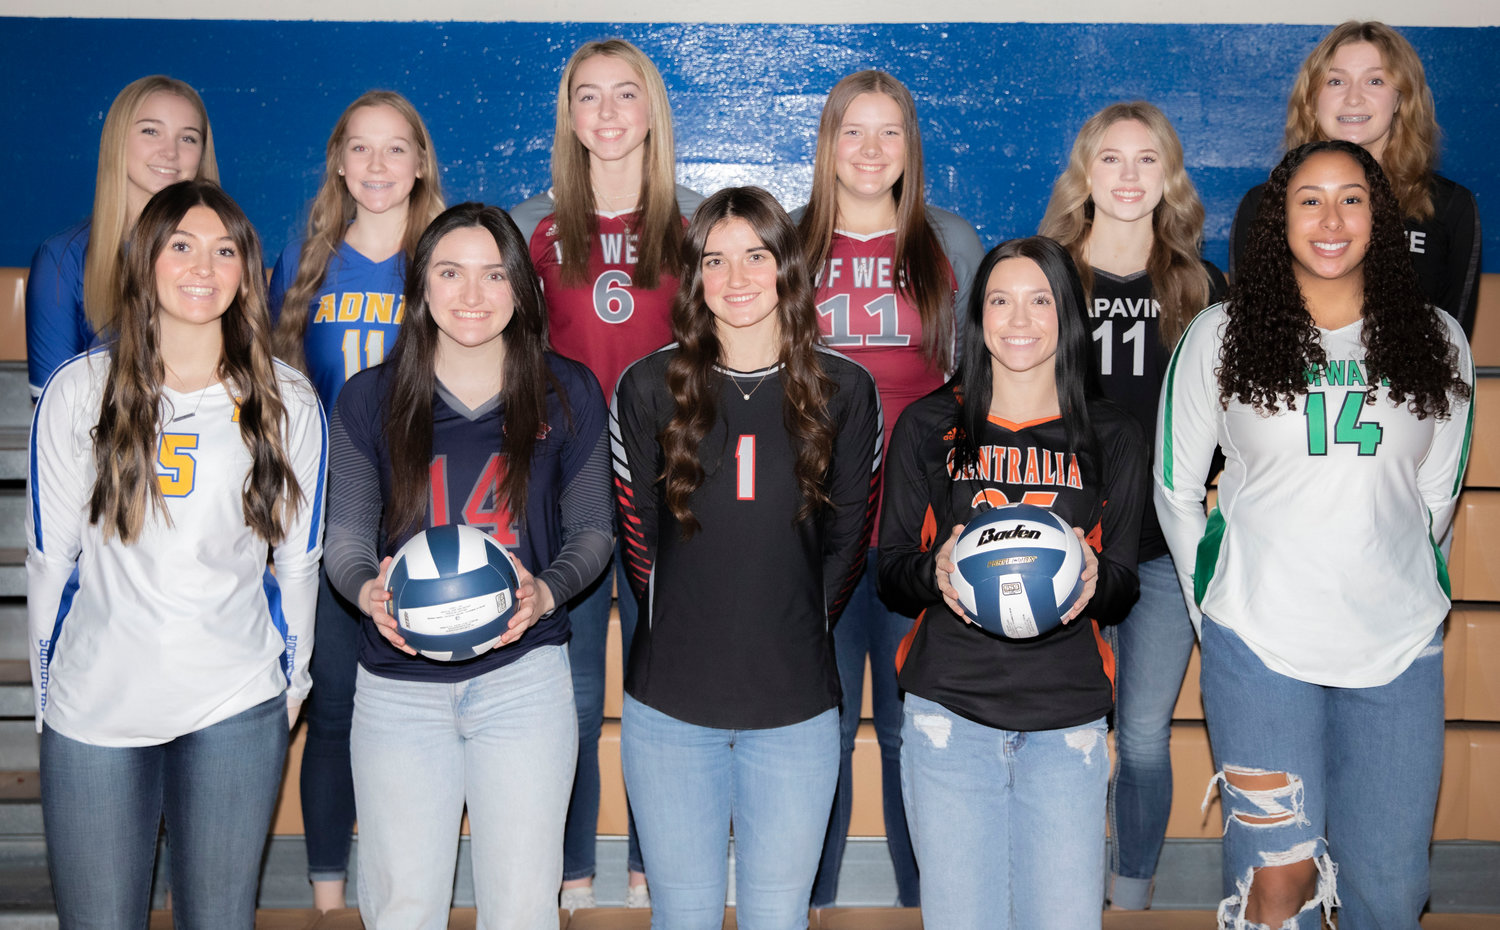 The Chronicle's 2022-23 All-Area Girls Volleyball Team poses for a photo in the Centralia College gymnasium on Monday, December 5, 2022.